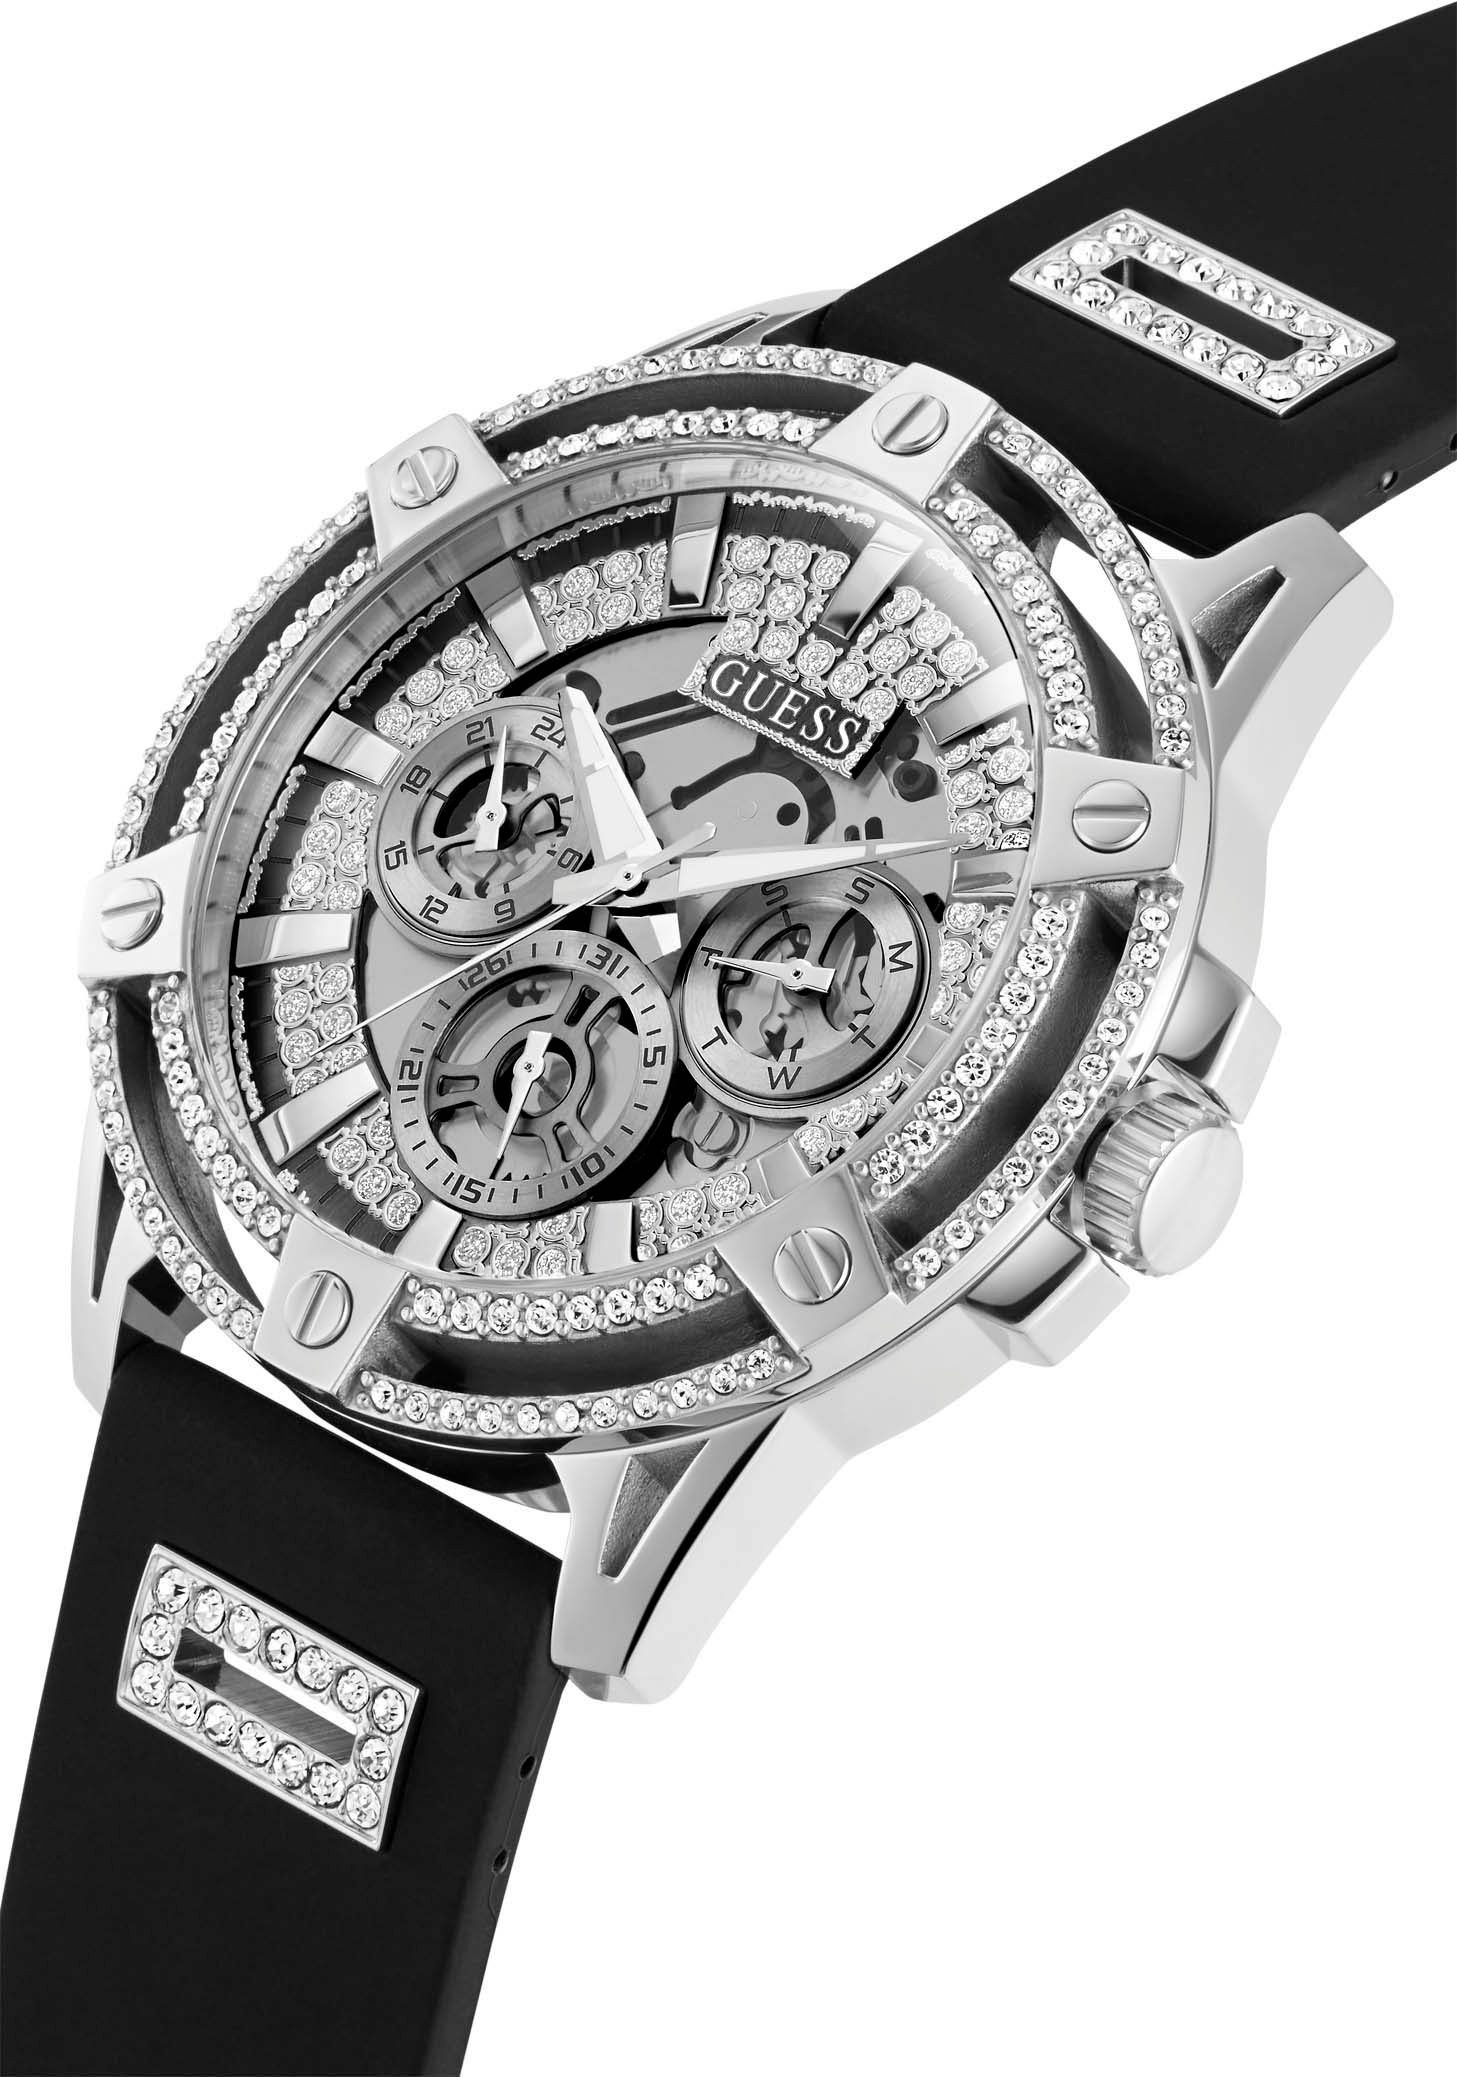 Multifunktionsuhr GW0537G1 Guess